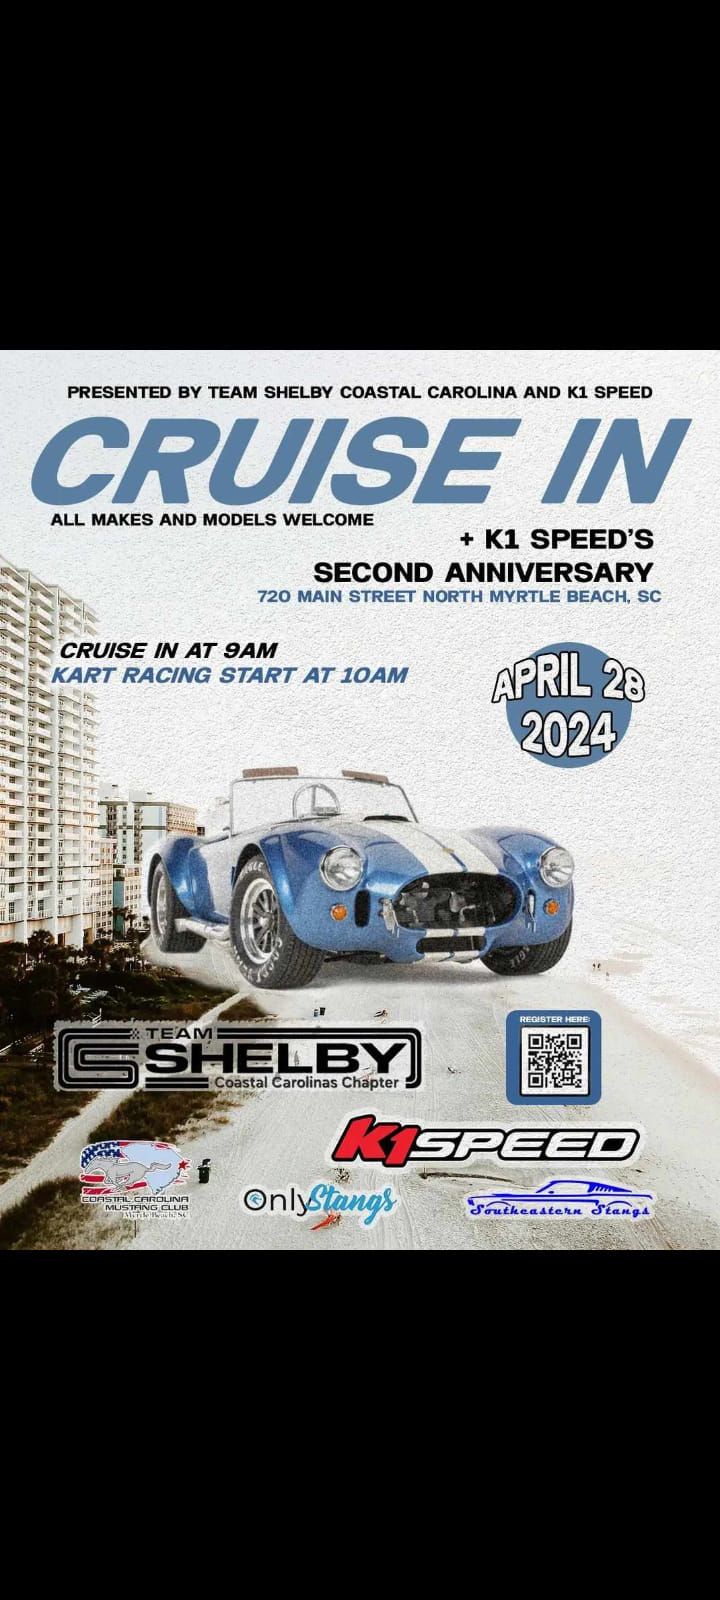 Open Cruise In- Presented by Team Shelby Coastal Carolina and K1 Speed